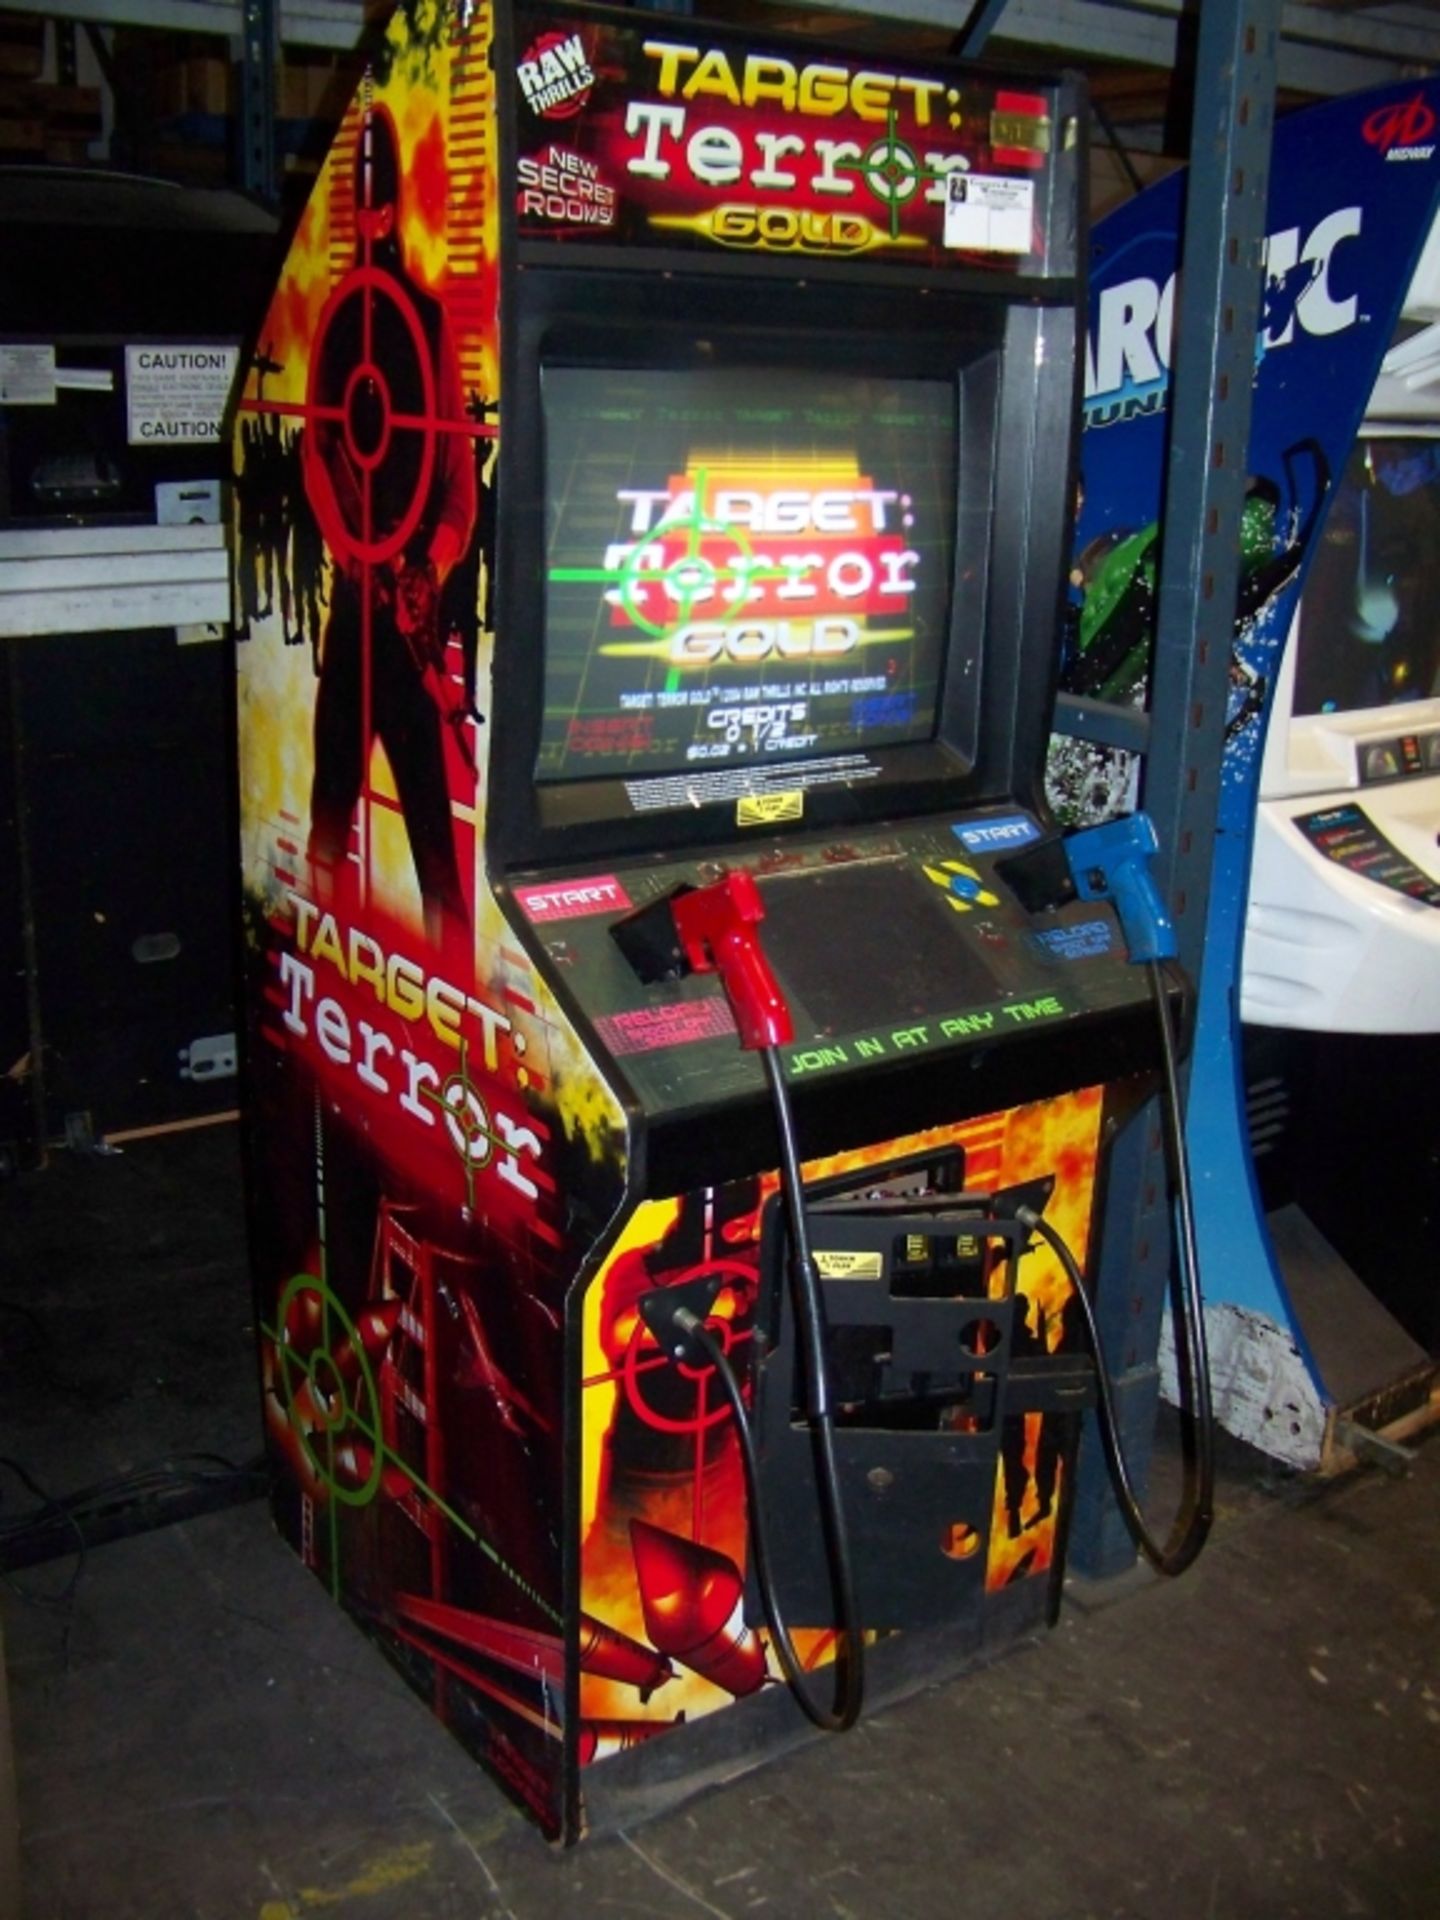 TARGET TERROR GOLD DEDICATED SHOOTER ARCADE GAME Item is in used condition. Evidence of wear and